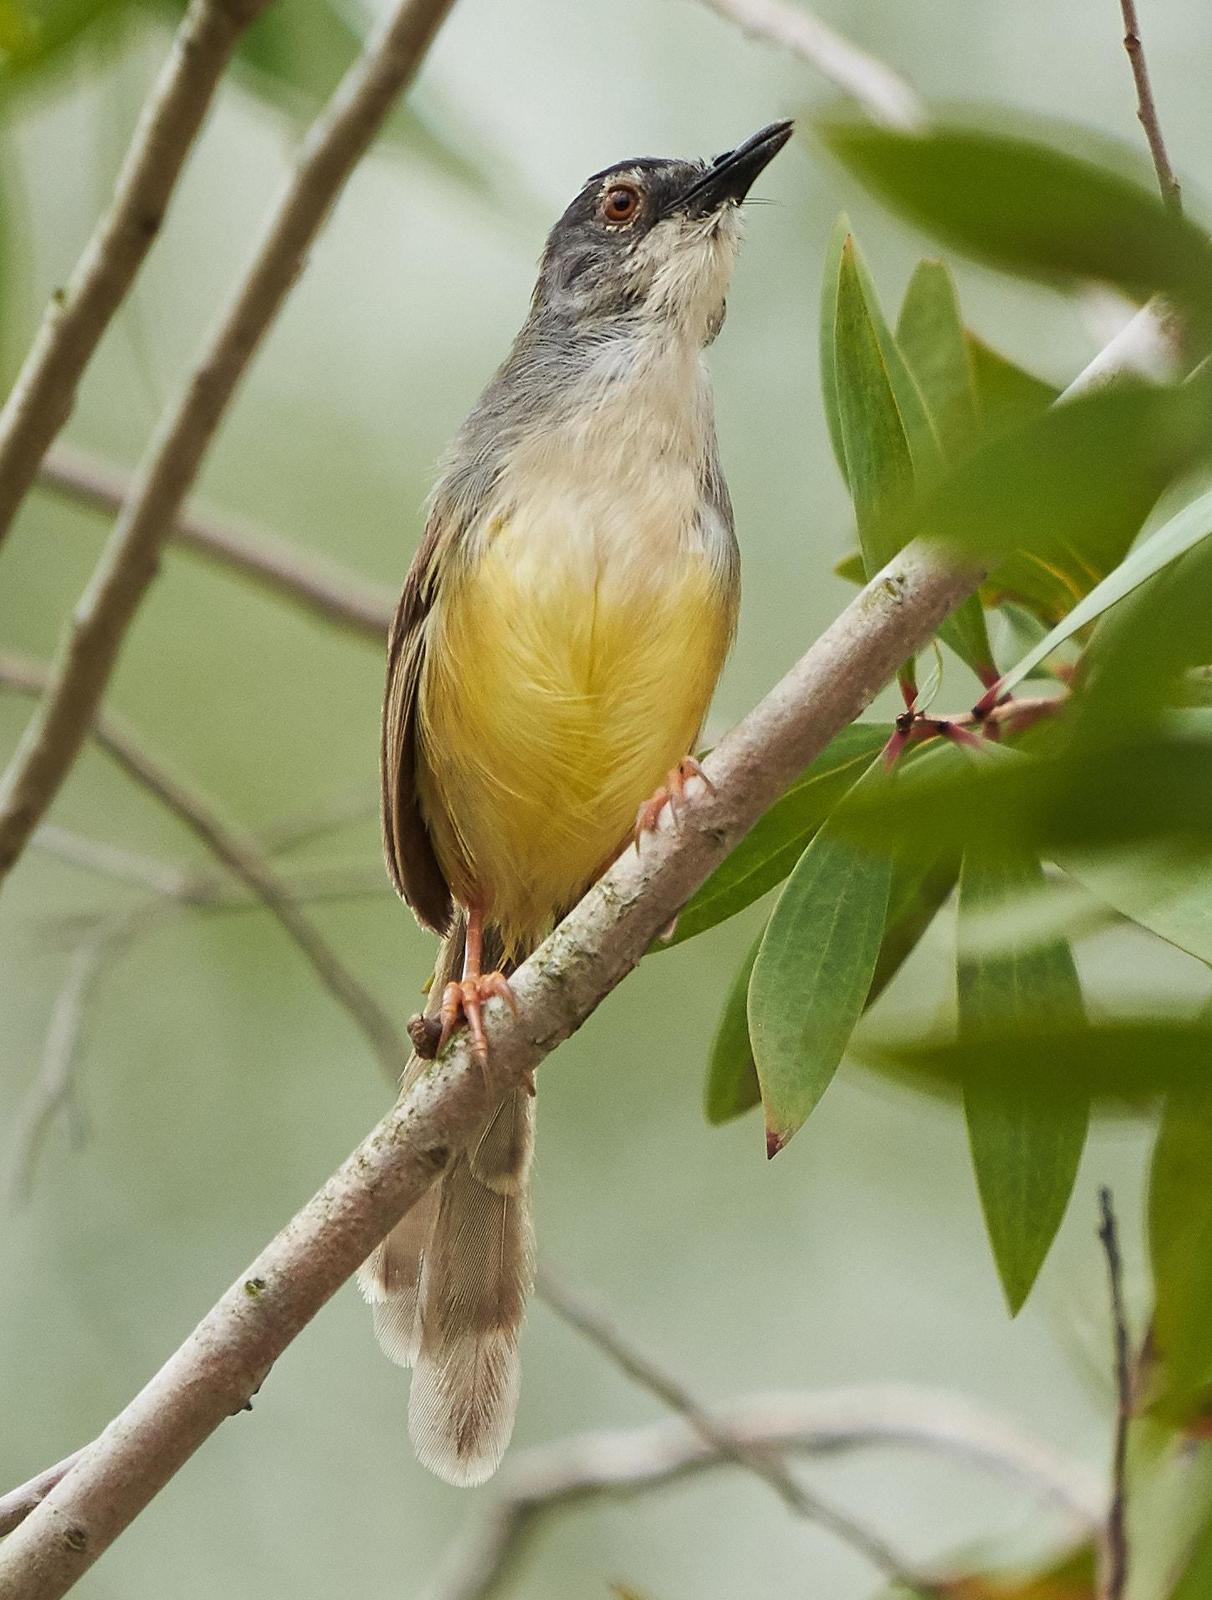 Yellow-bellied Prinia Photo by Steven Cheong